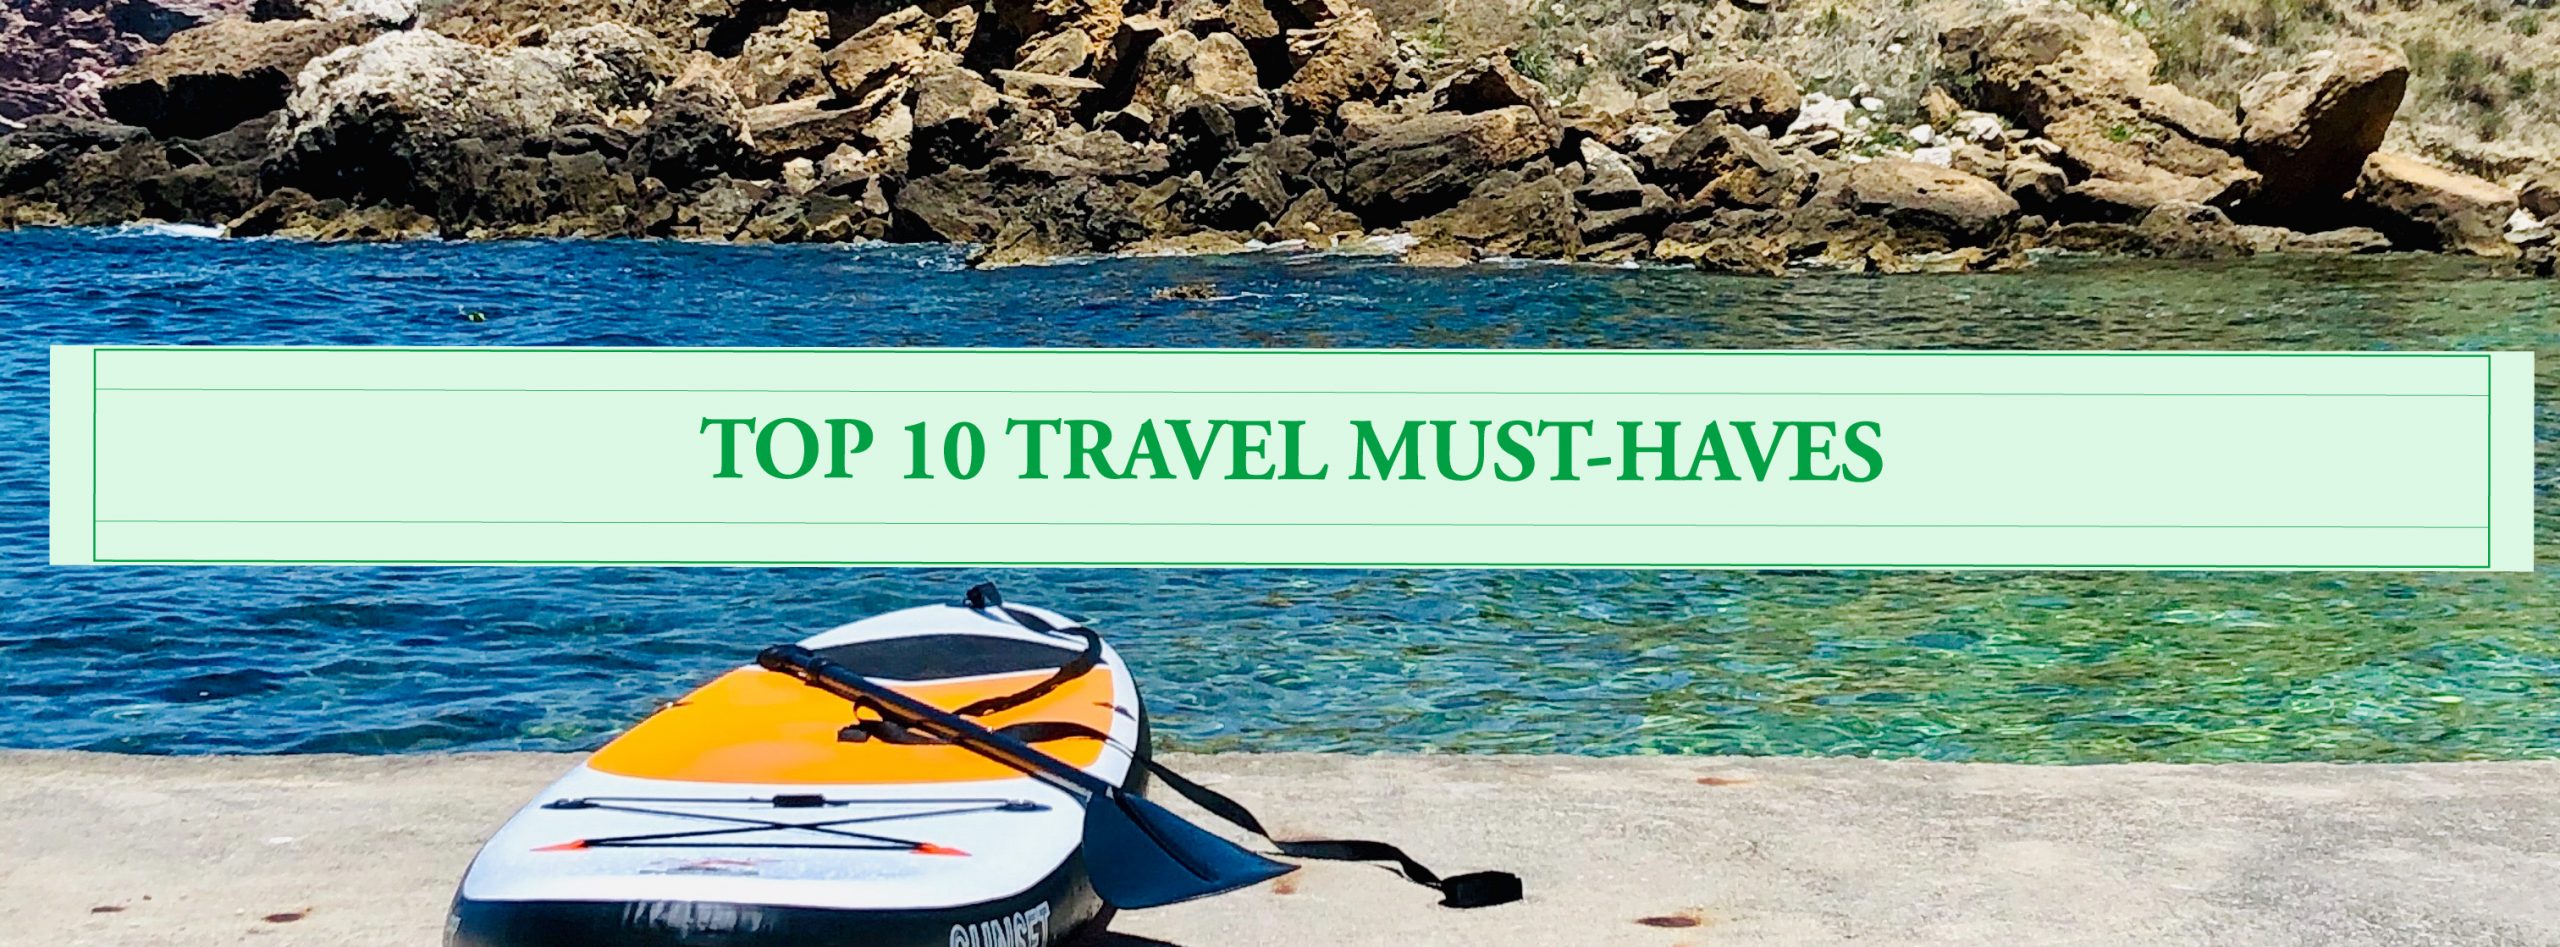 You are currently viewing Top 10 Travel Must-Haves